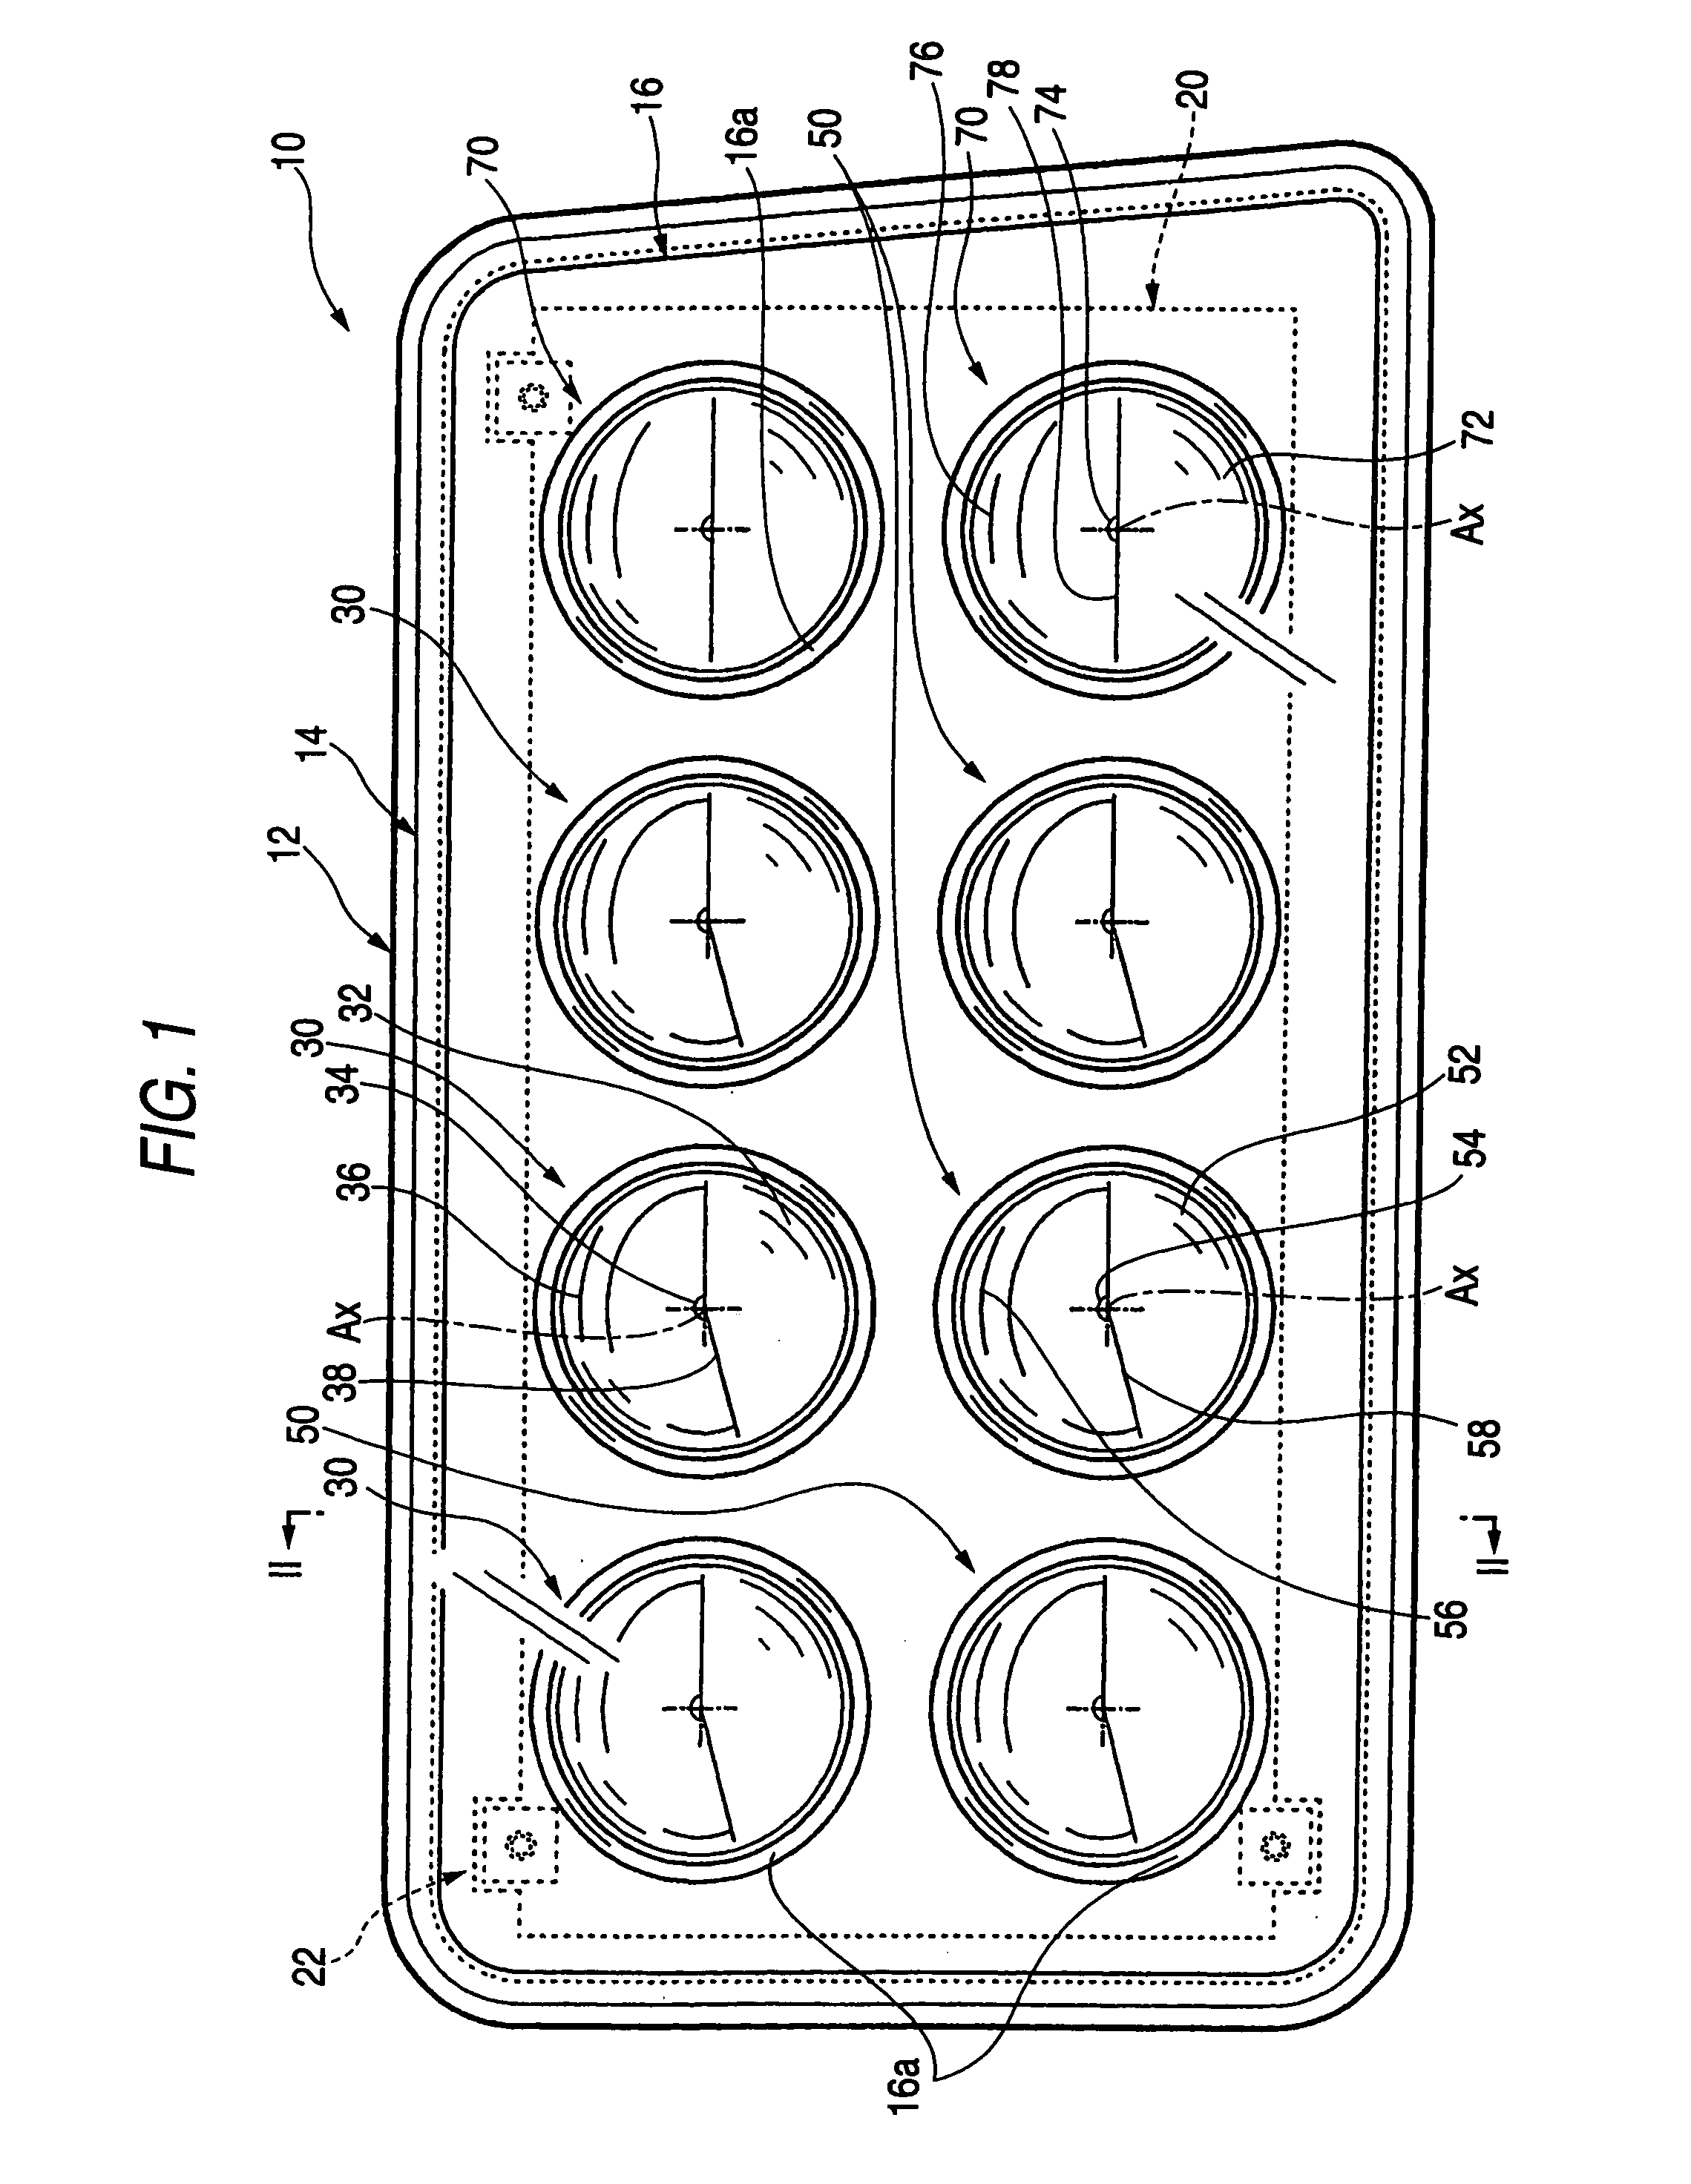 Vehicle headlight including a plurality of led lighting device units